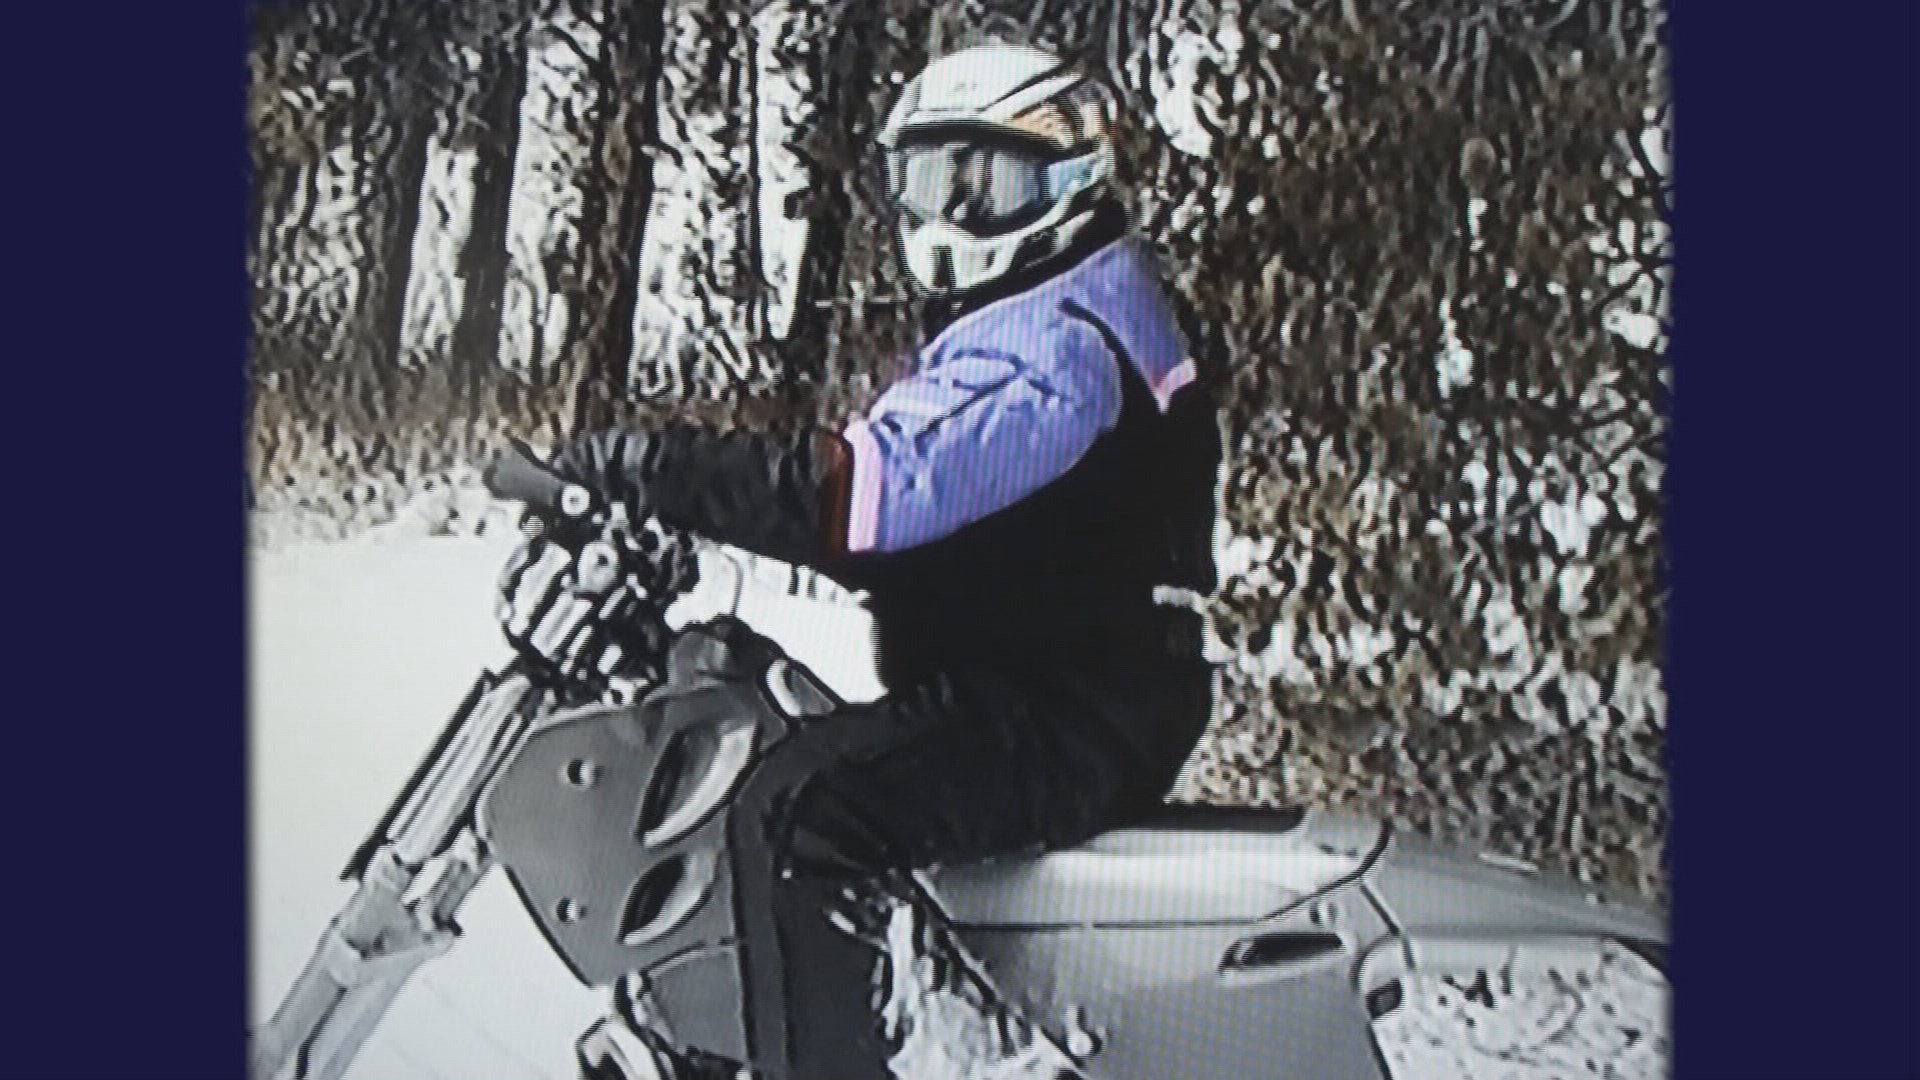 Home video of Vernal Forbes taking the "maiden voyage" on his first snowbike kit prototype. The kit has since evolved into the modern snowbike, now one of the fastest-growing winter powersports.